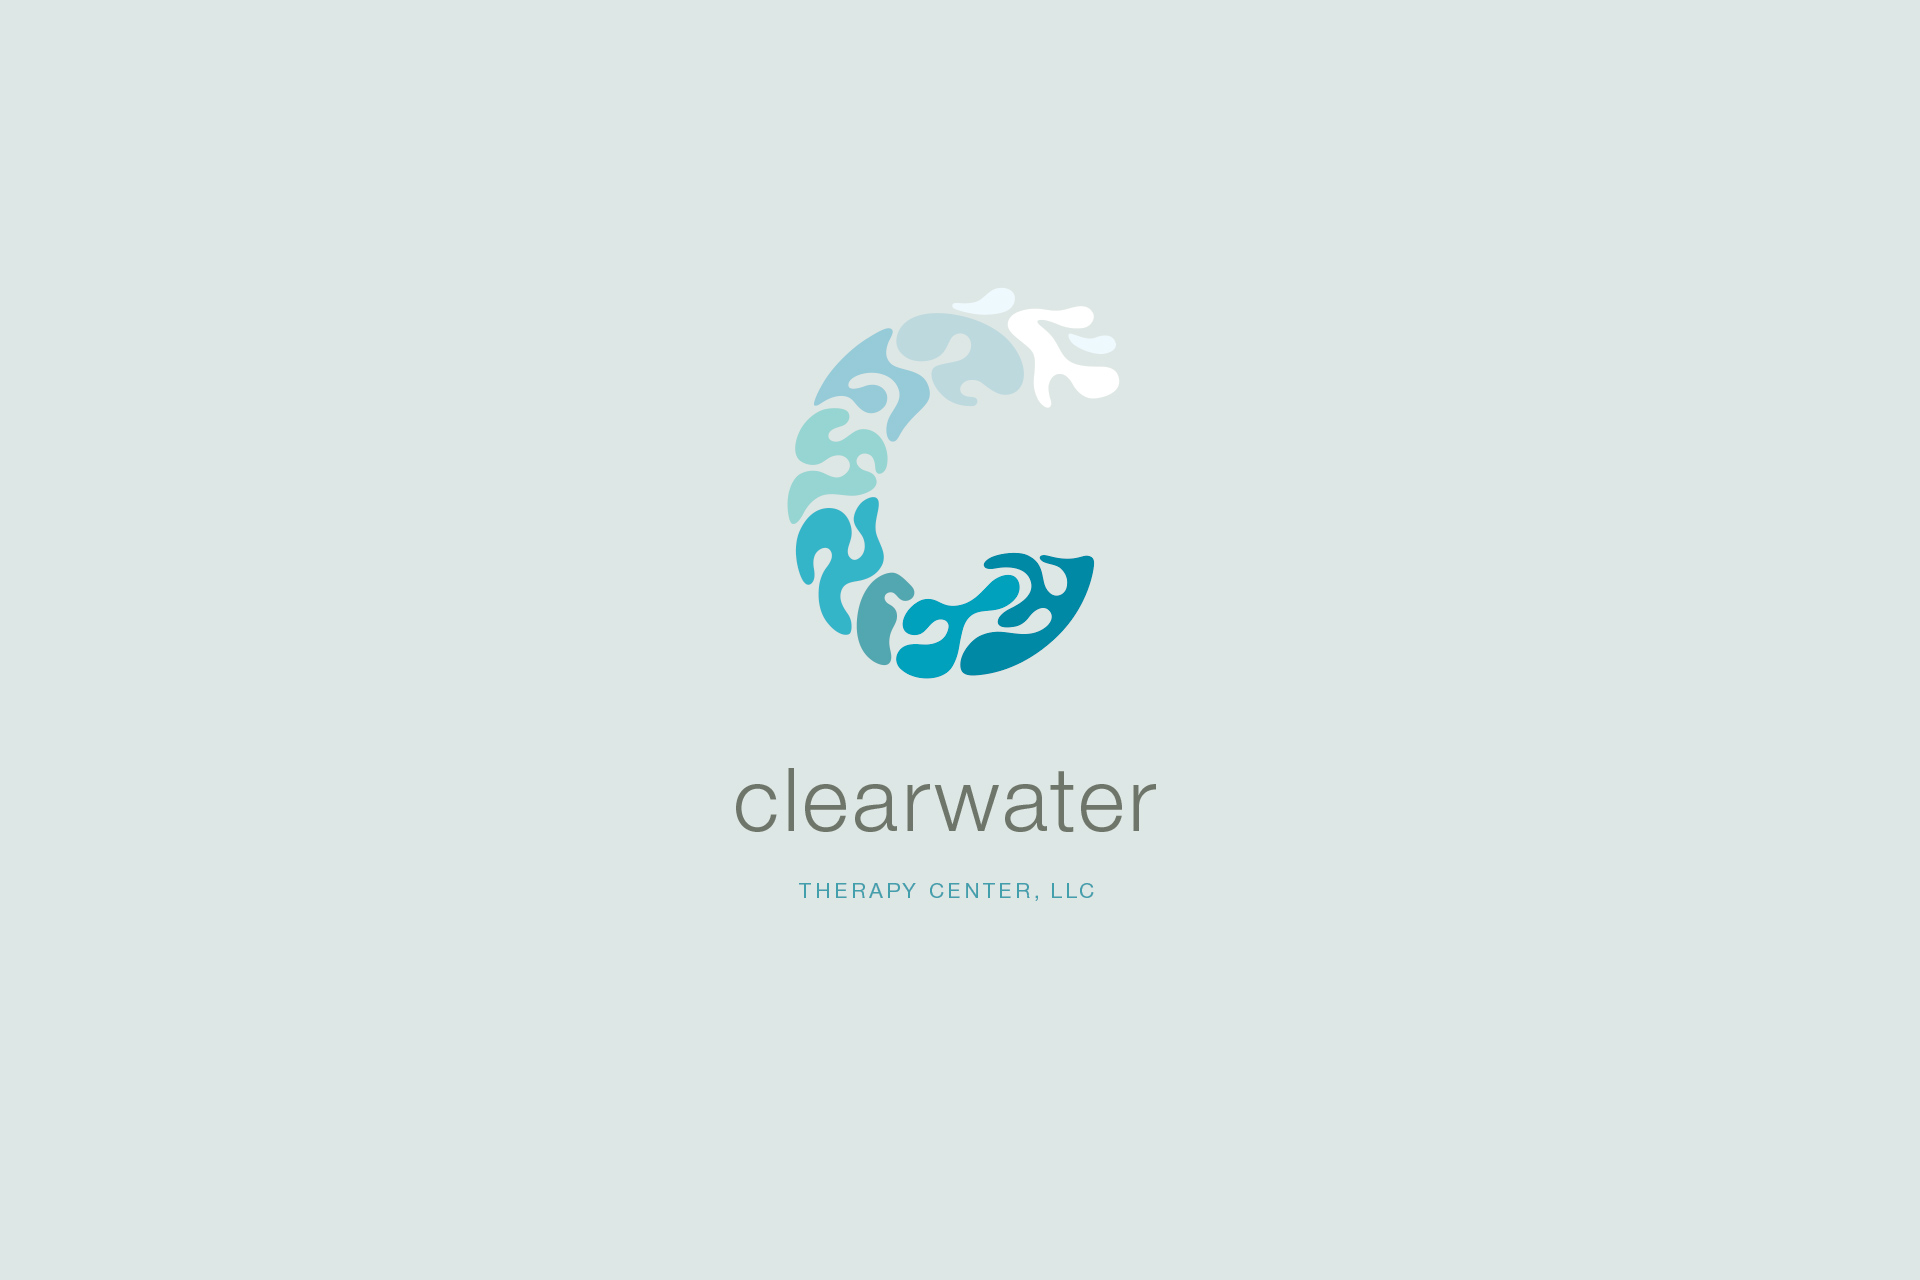 Clearwater Therapy Center logo identity design